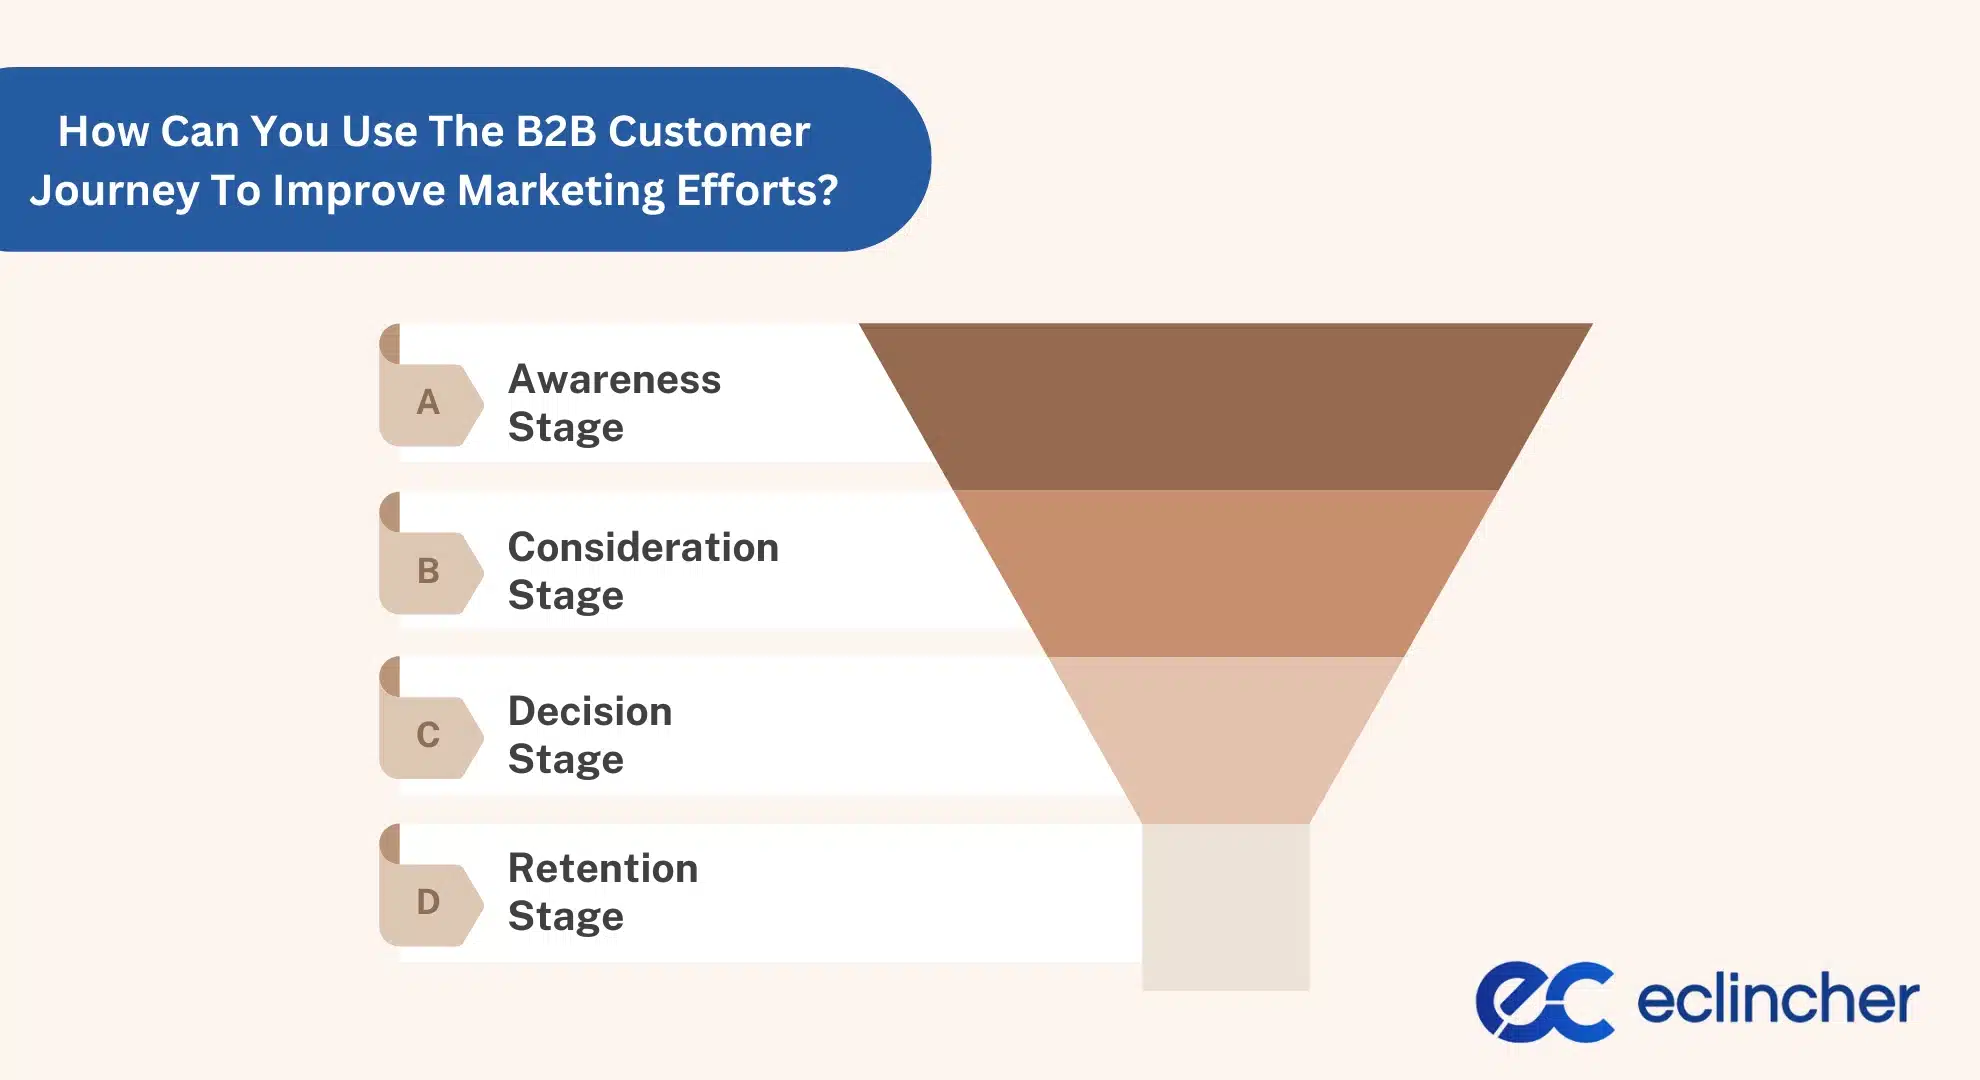 How Can You Use The B2B Customer Journey To Improve Marketing Efforts